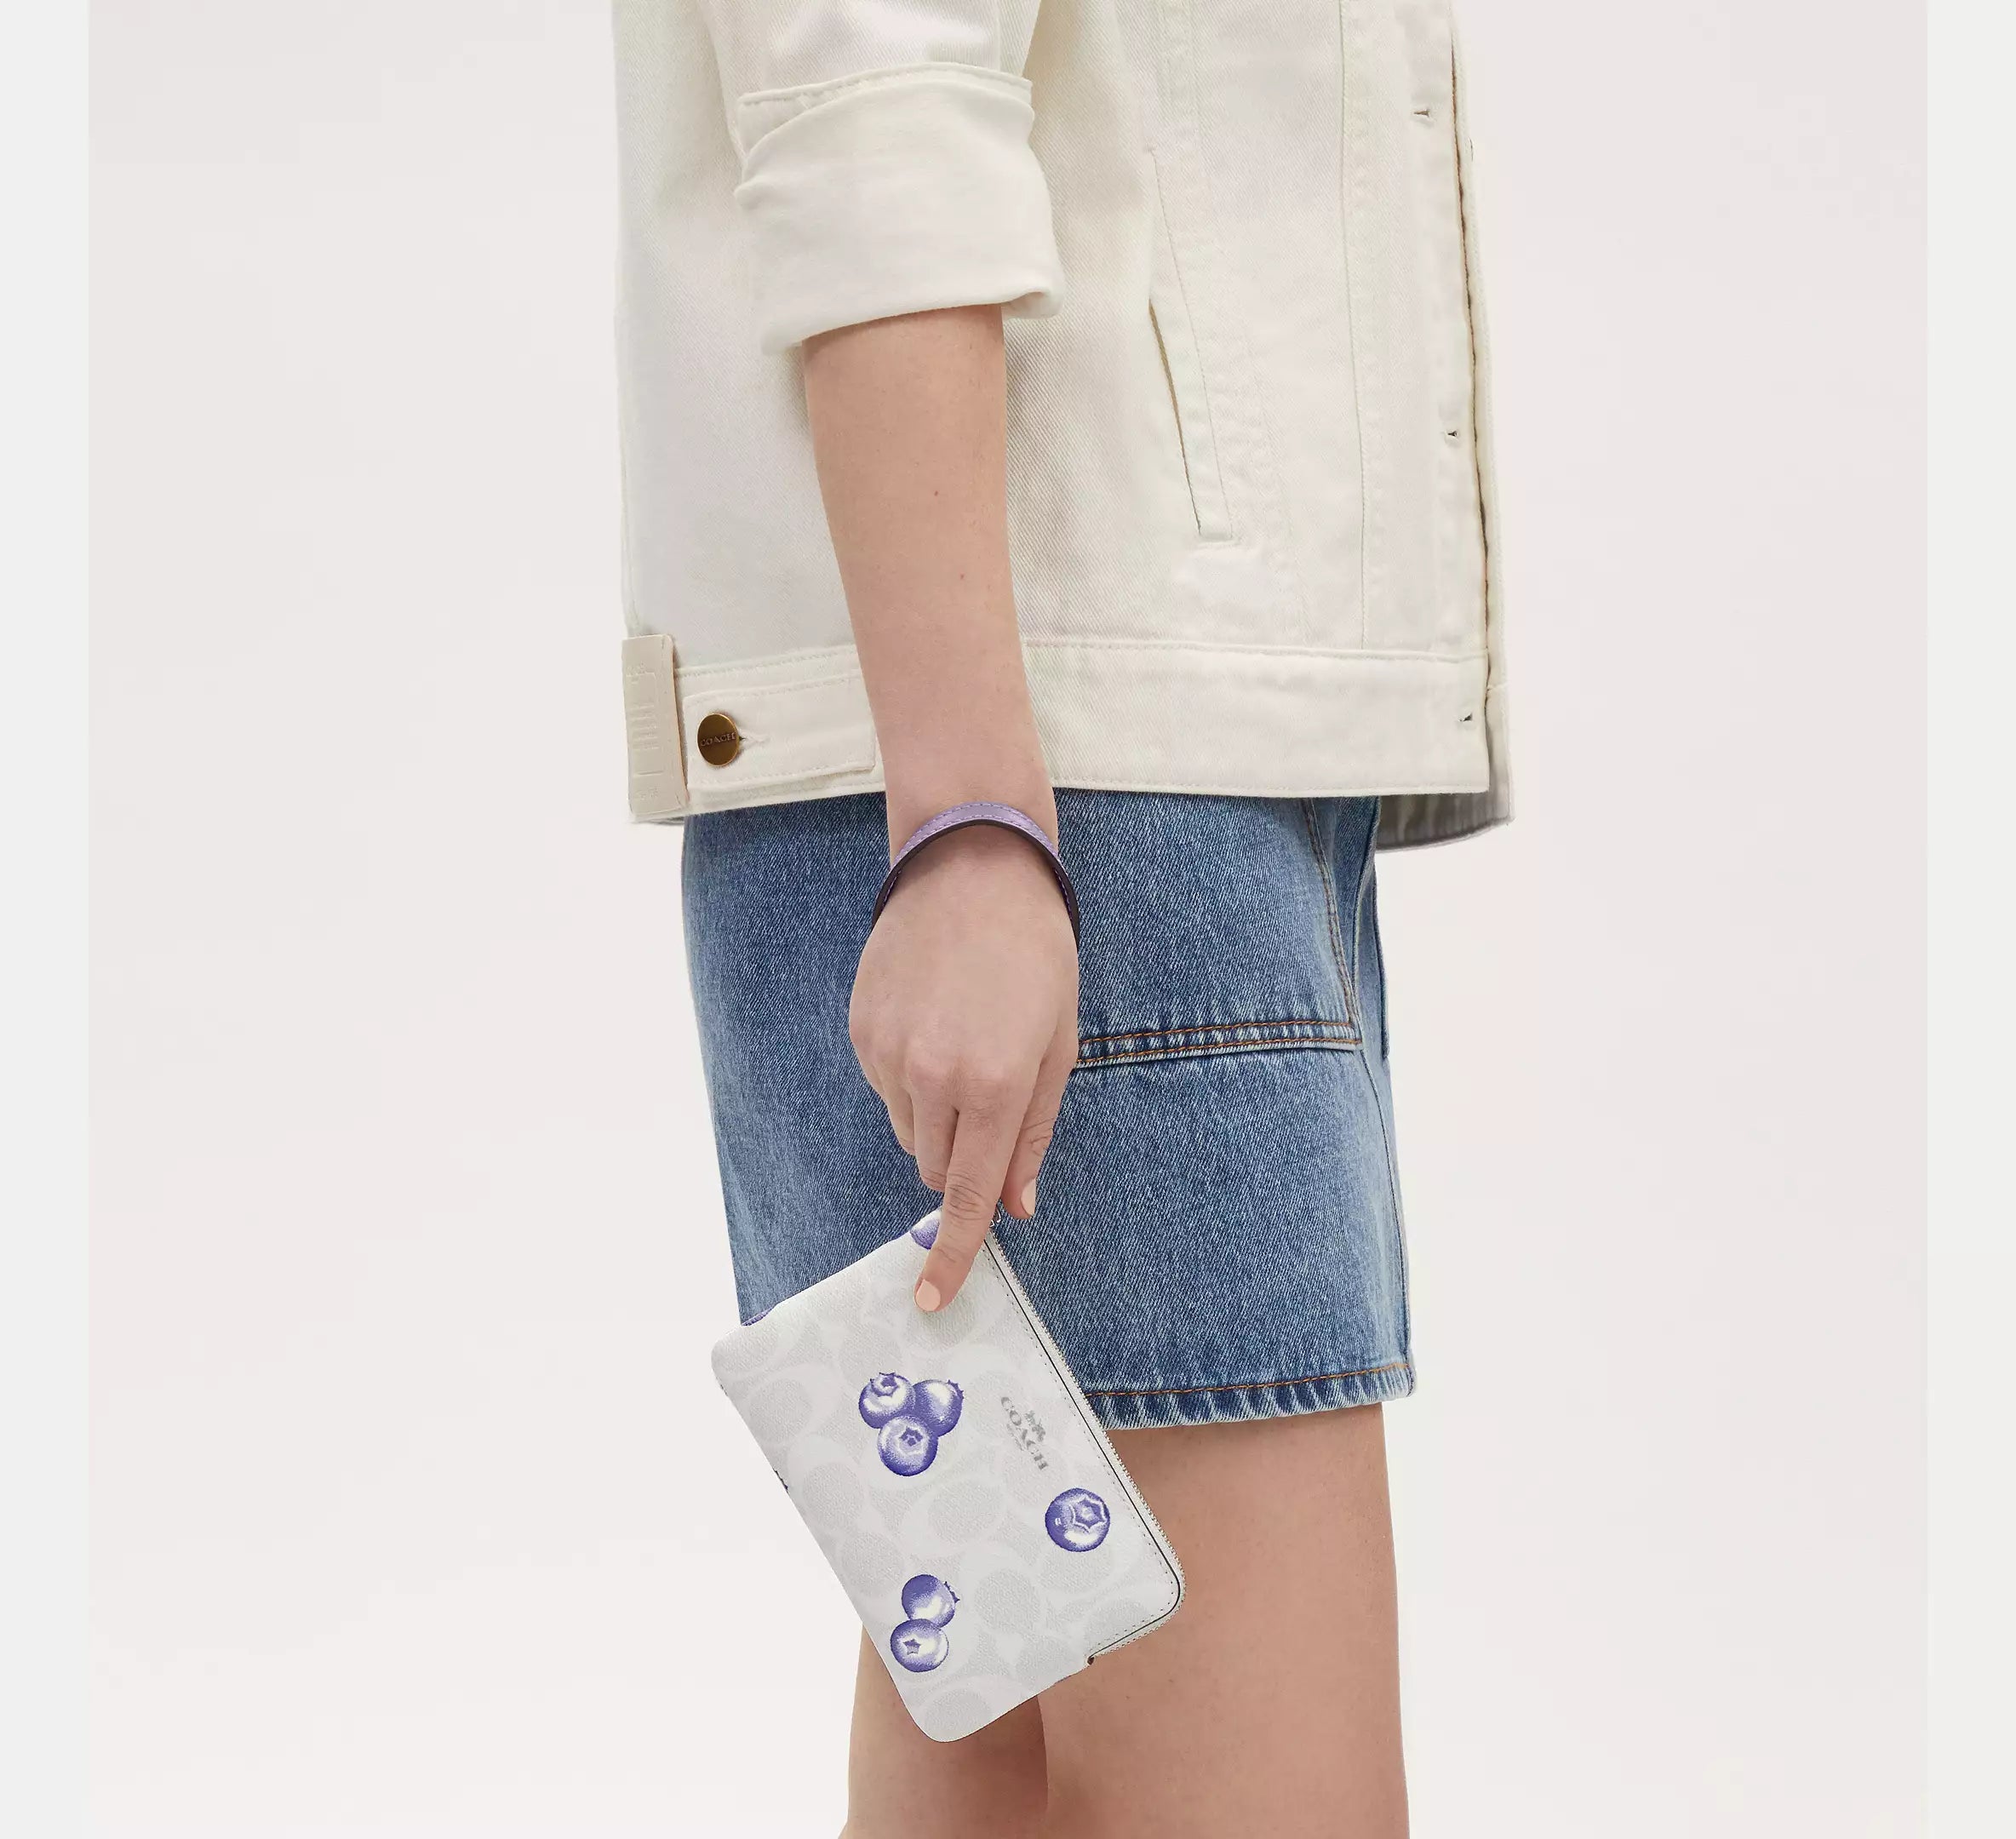 Corner Zip Wristlet In Signature Canvas With Blueberry Print